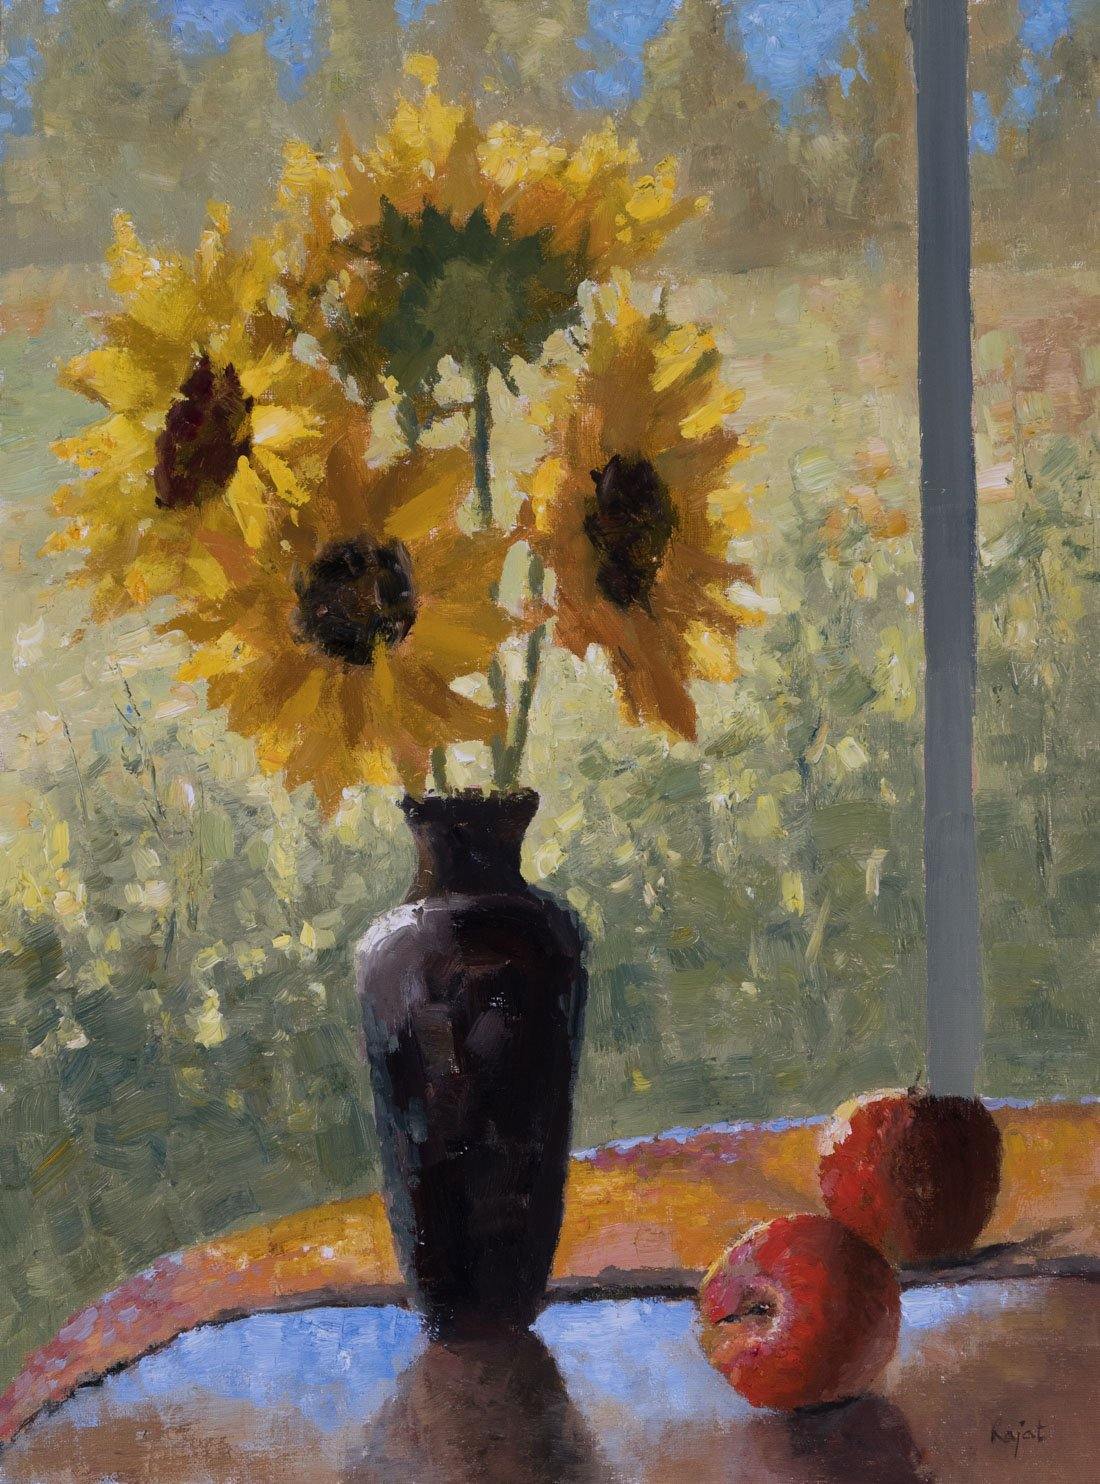 Sunflowers and Apples